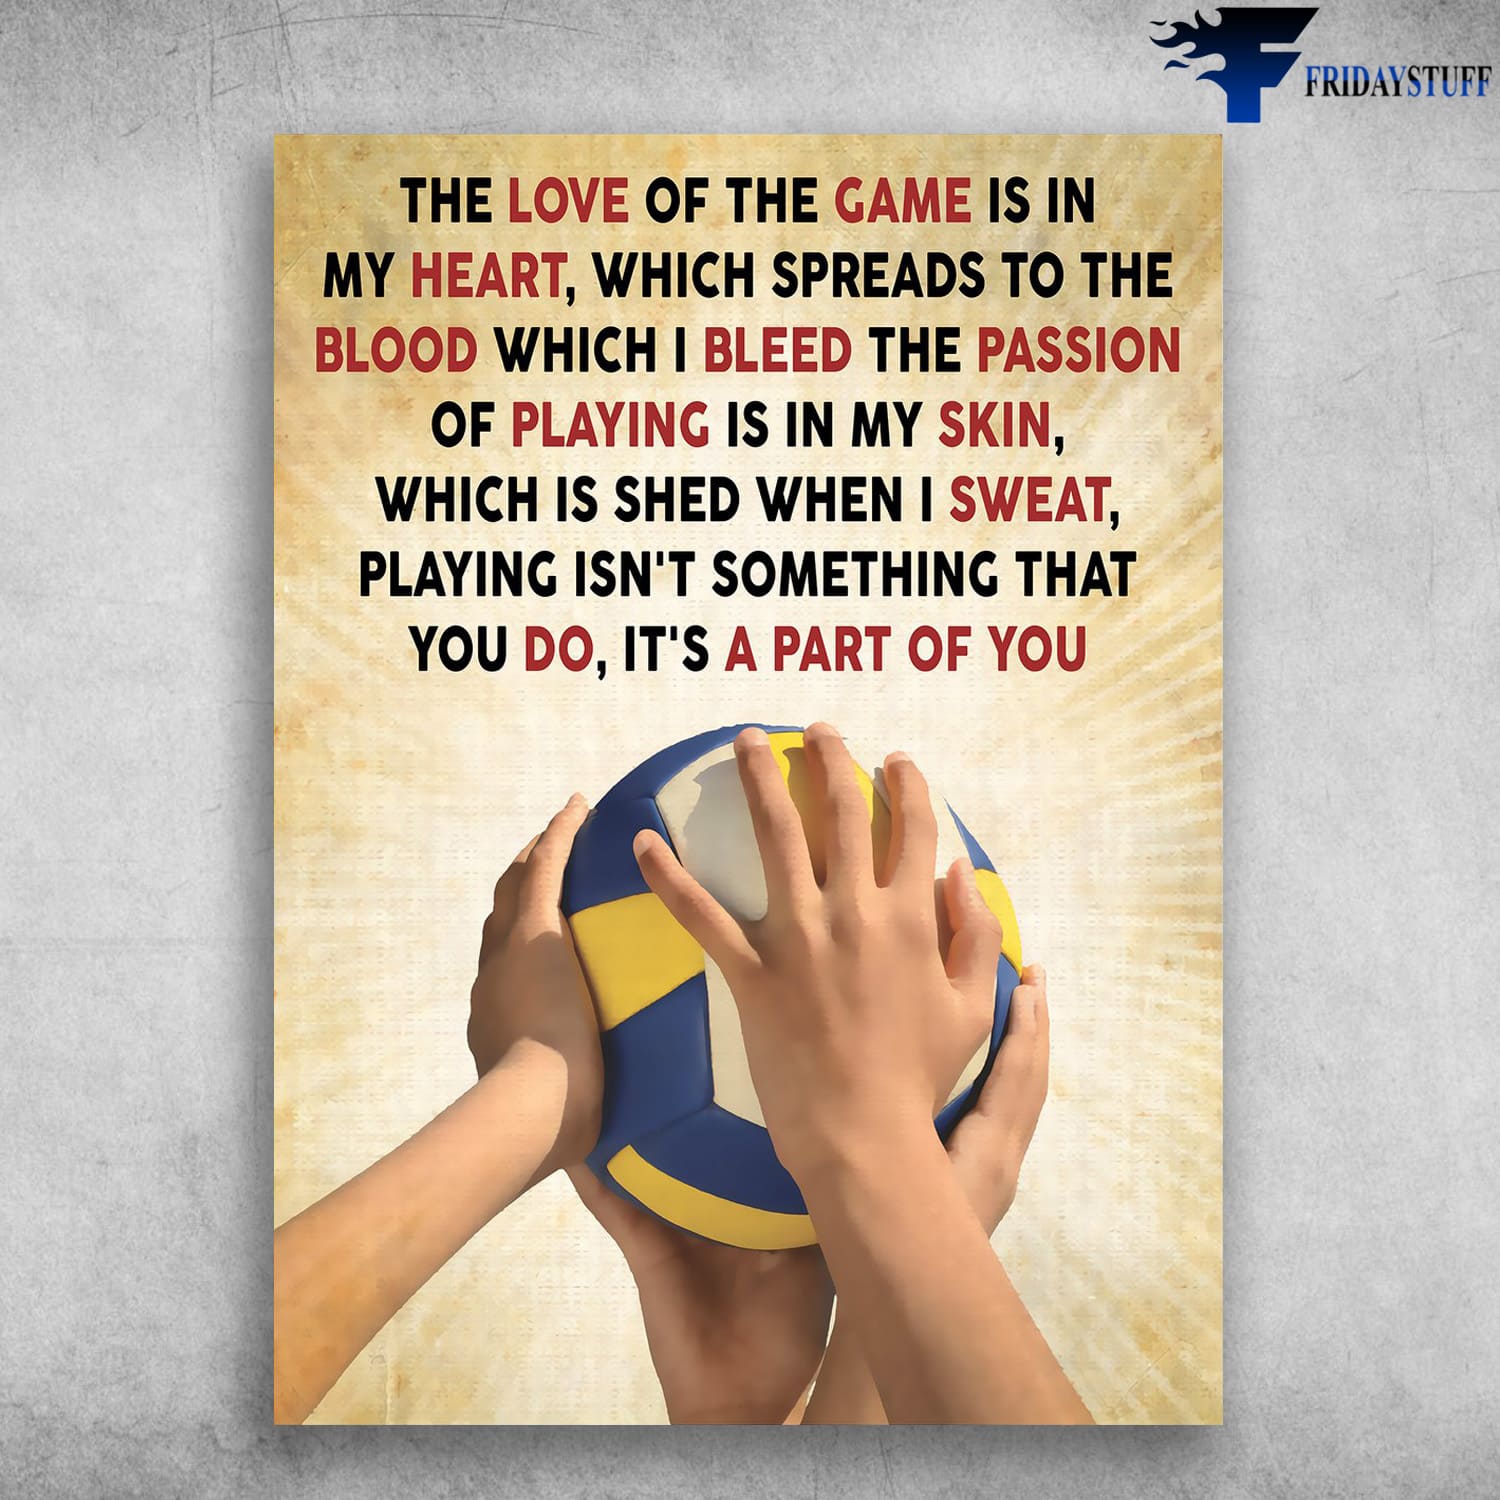 Volleyball Poster, Volleball Lover, The Love Of The Game, Is In My Heart, Which Spreads To The Blood Which I Bleed, The Passion Of Playing Is In My Skin, Which Is Shed When I Sweat